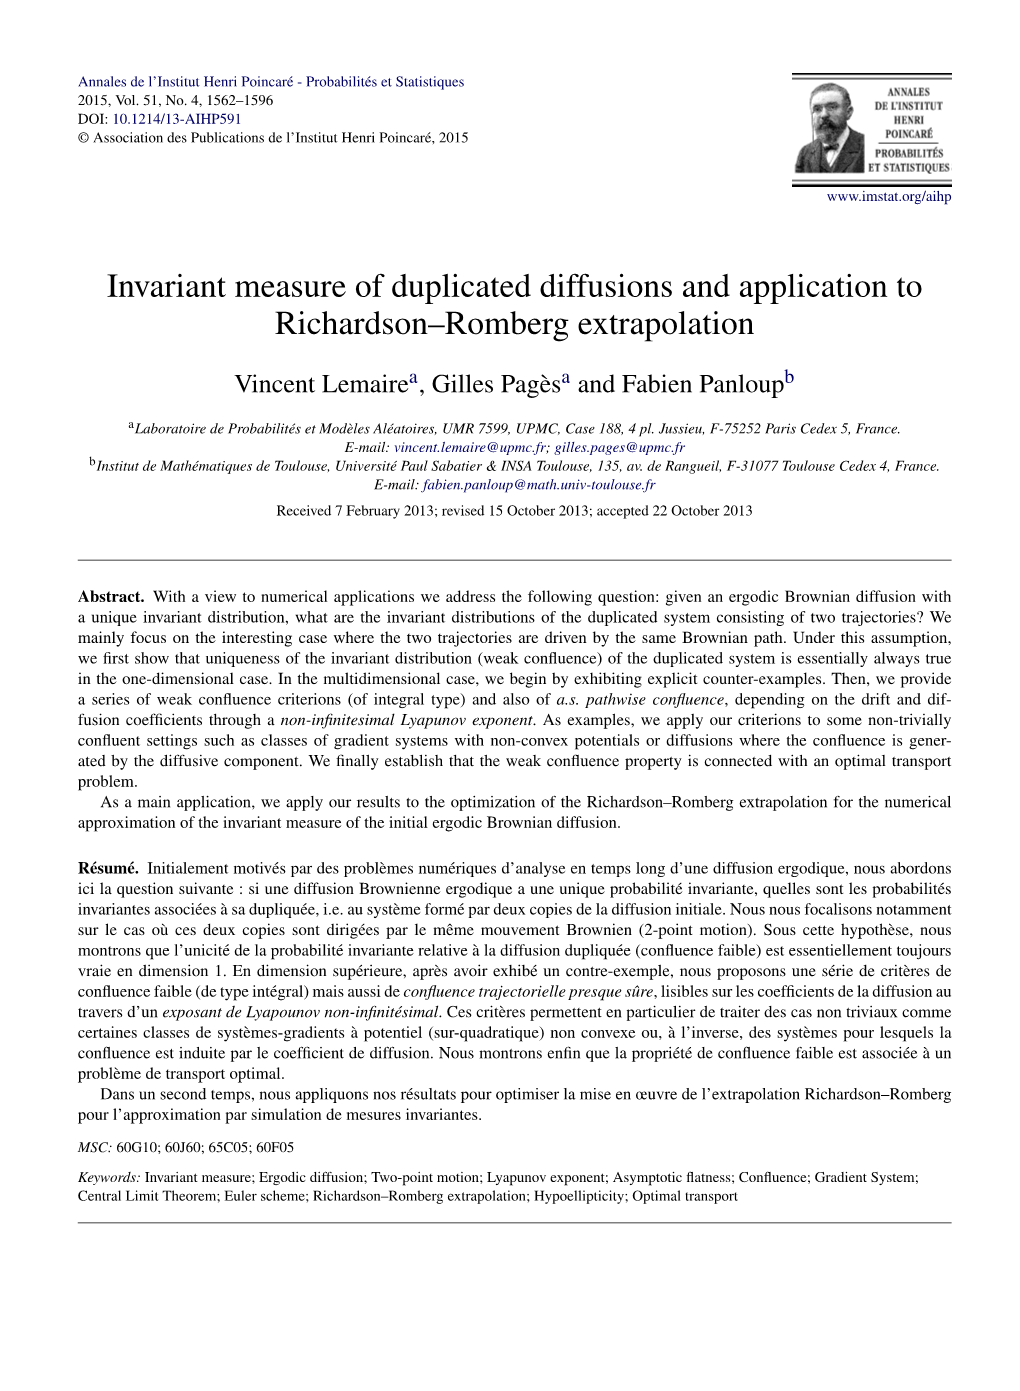 Invariant Measure of Duplicated Diffusions and Application to Richardson–Romberg Extrapolation